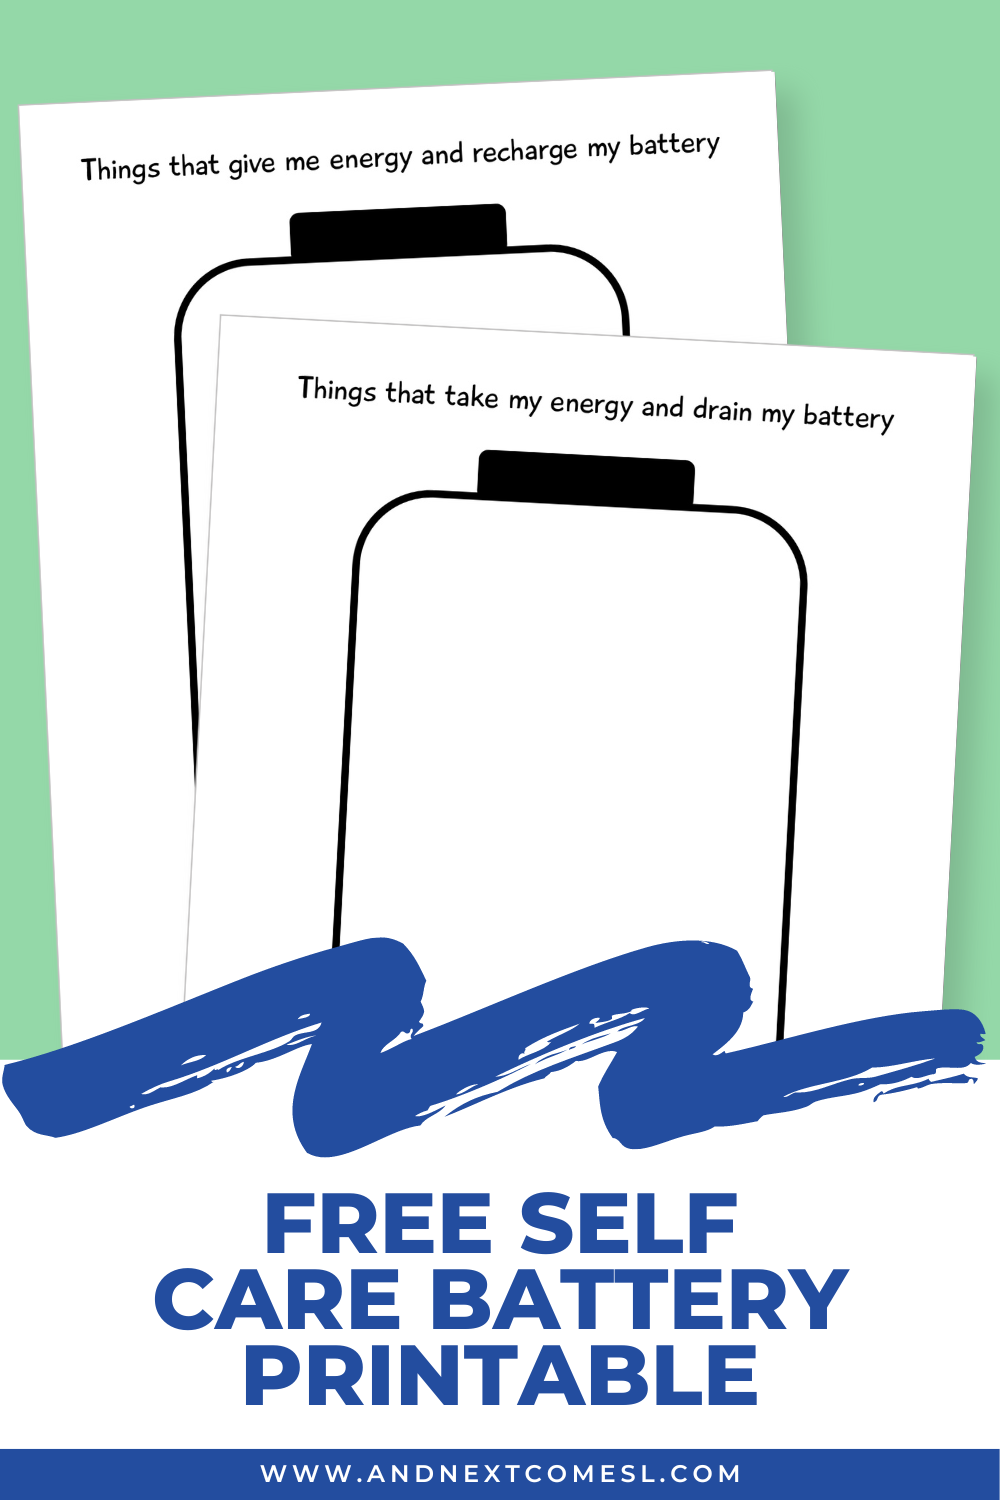 Use this free self care battery printable to identify the things that drain your energy and help you recharge your battery